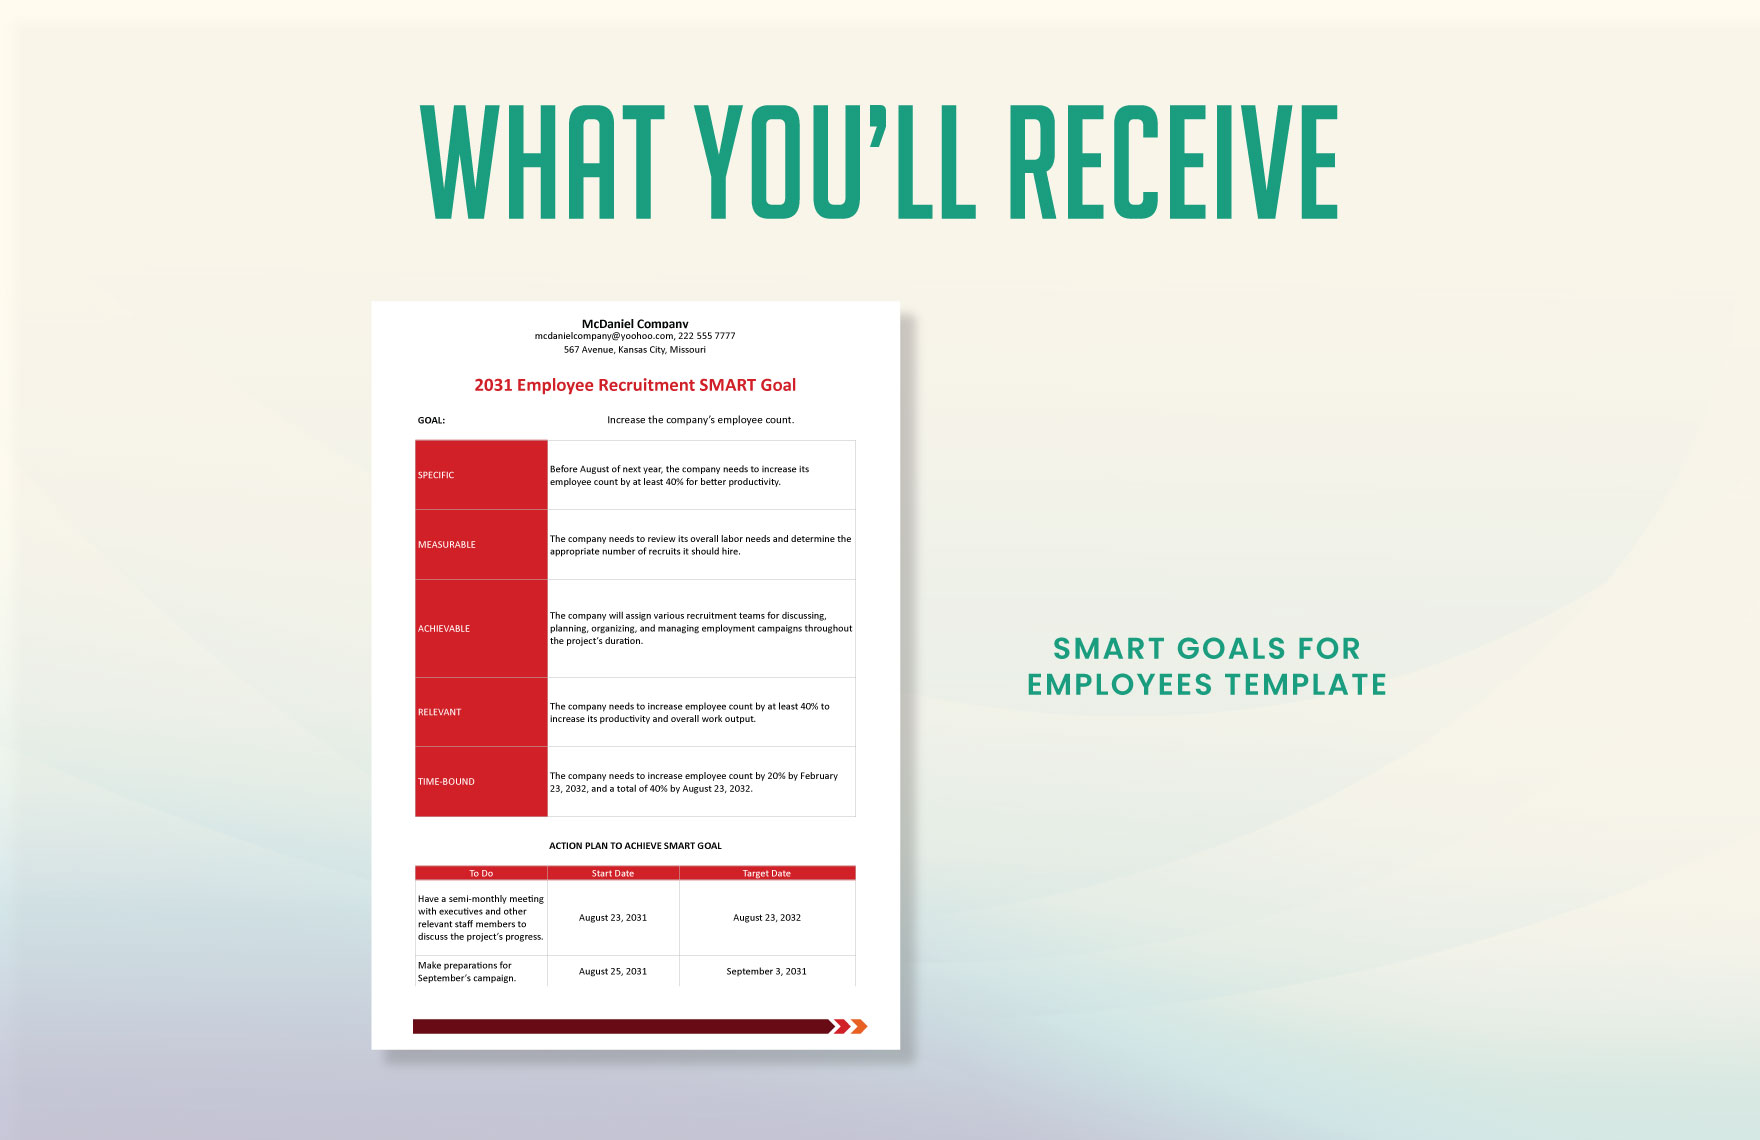 Smart Goals for Employees Template